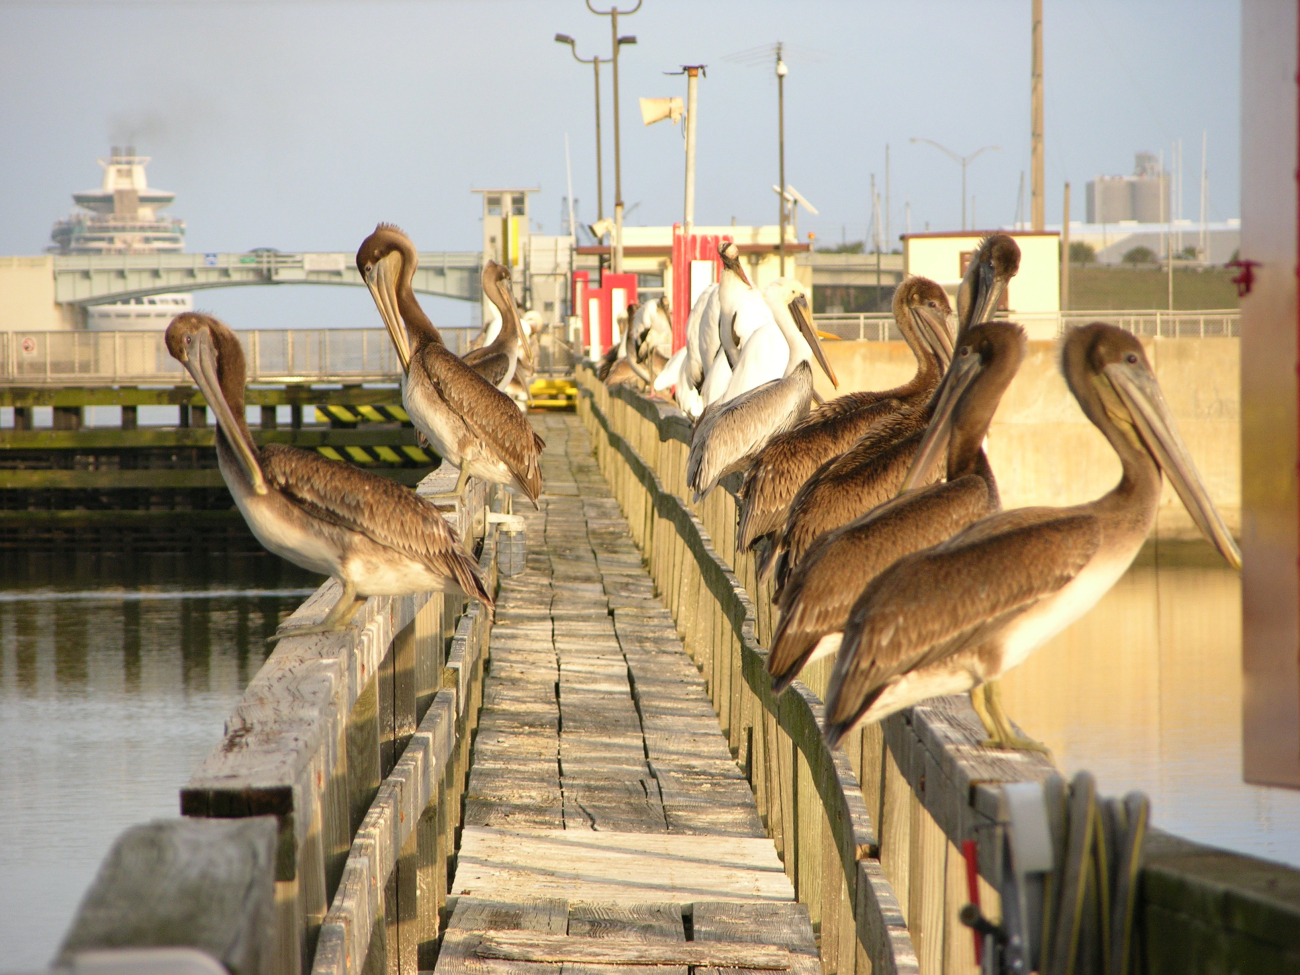 Brown pelicans and wood storks on a Florida pier near the cruise ship docks